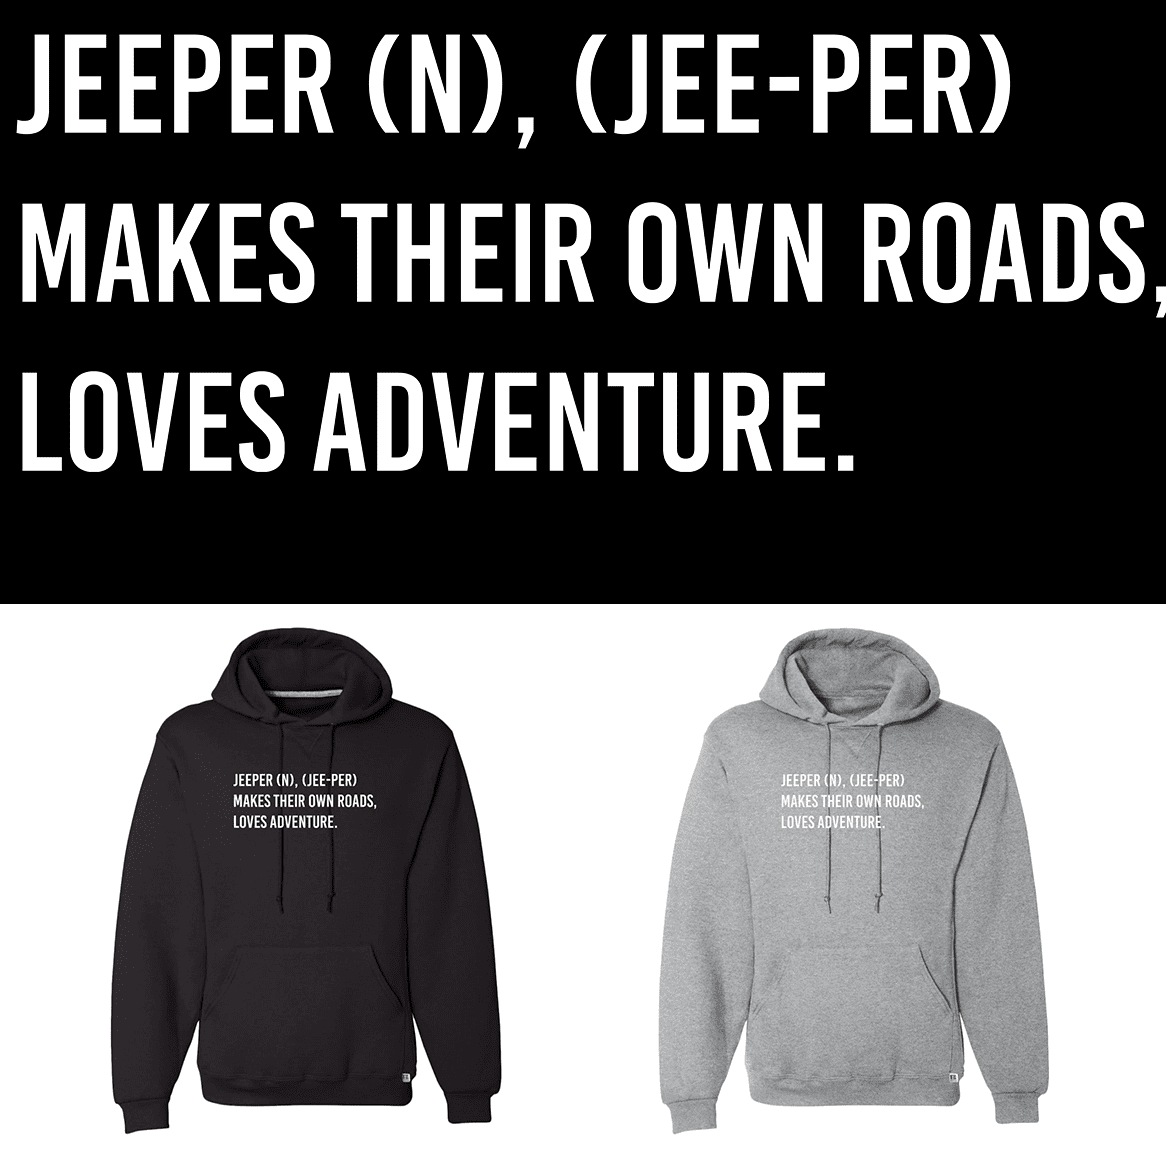 Definition of a Jeeper Made to Order